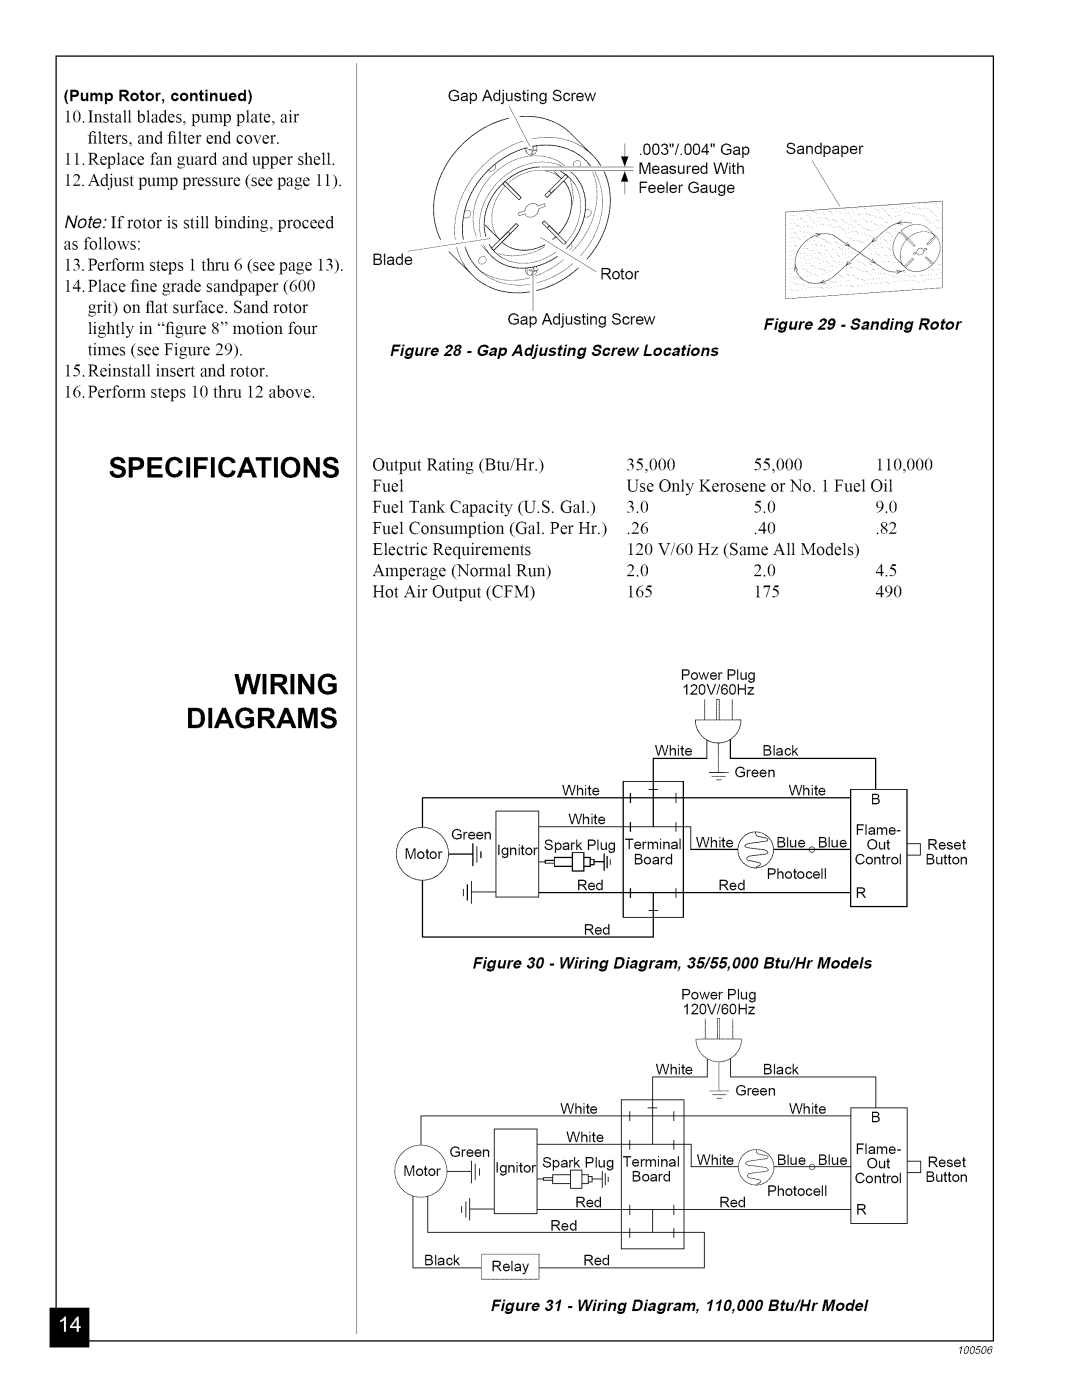 Sears 583.3565, 583.35683, 583.35682 Specifications, Wiring Diagrams, Pump Rotor, continued, rerminallBlueBlUelCoCBoard 